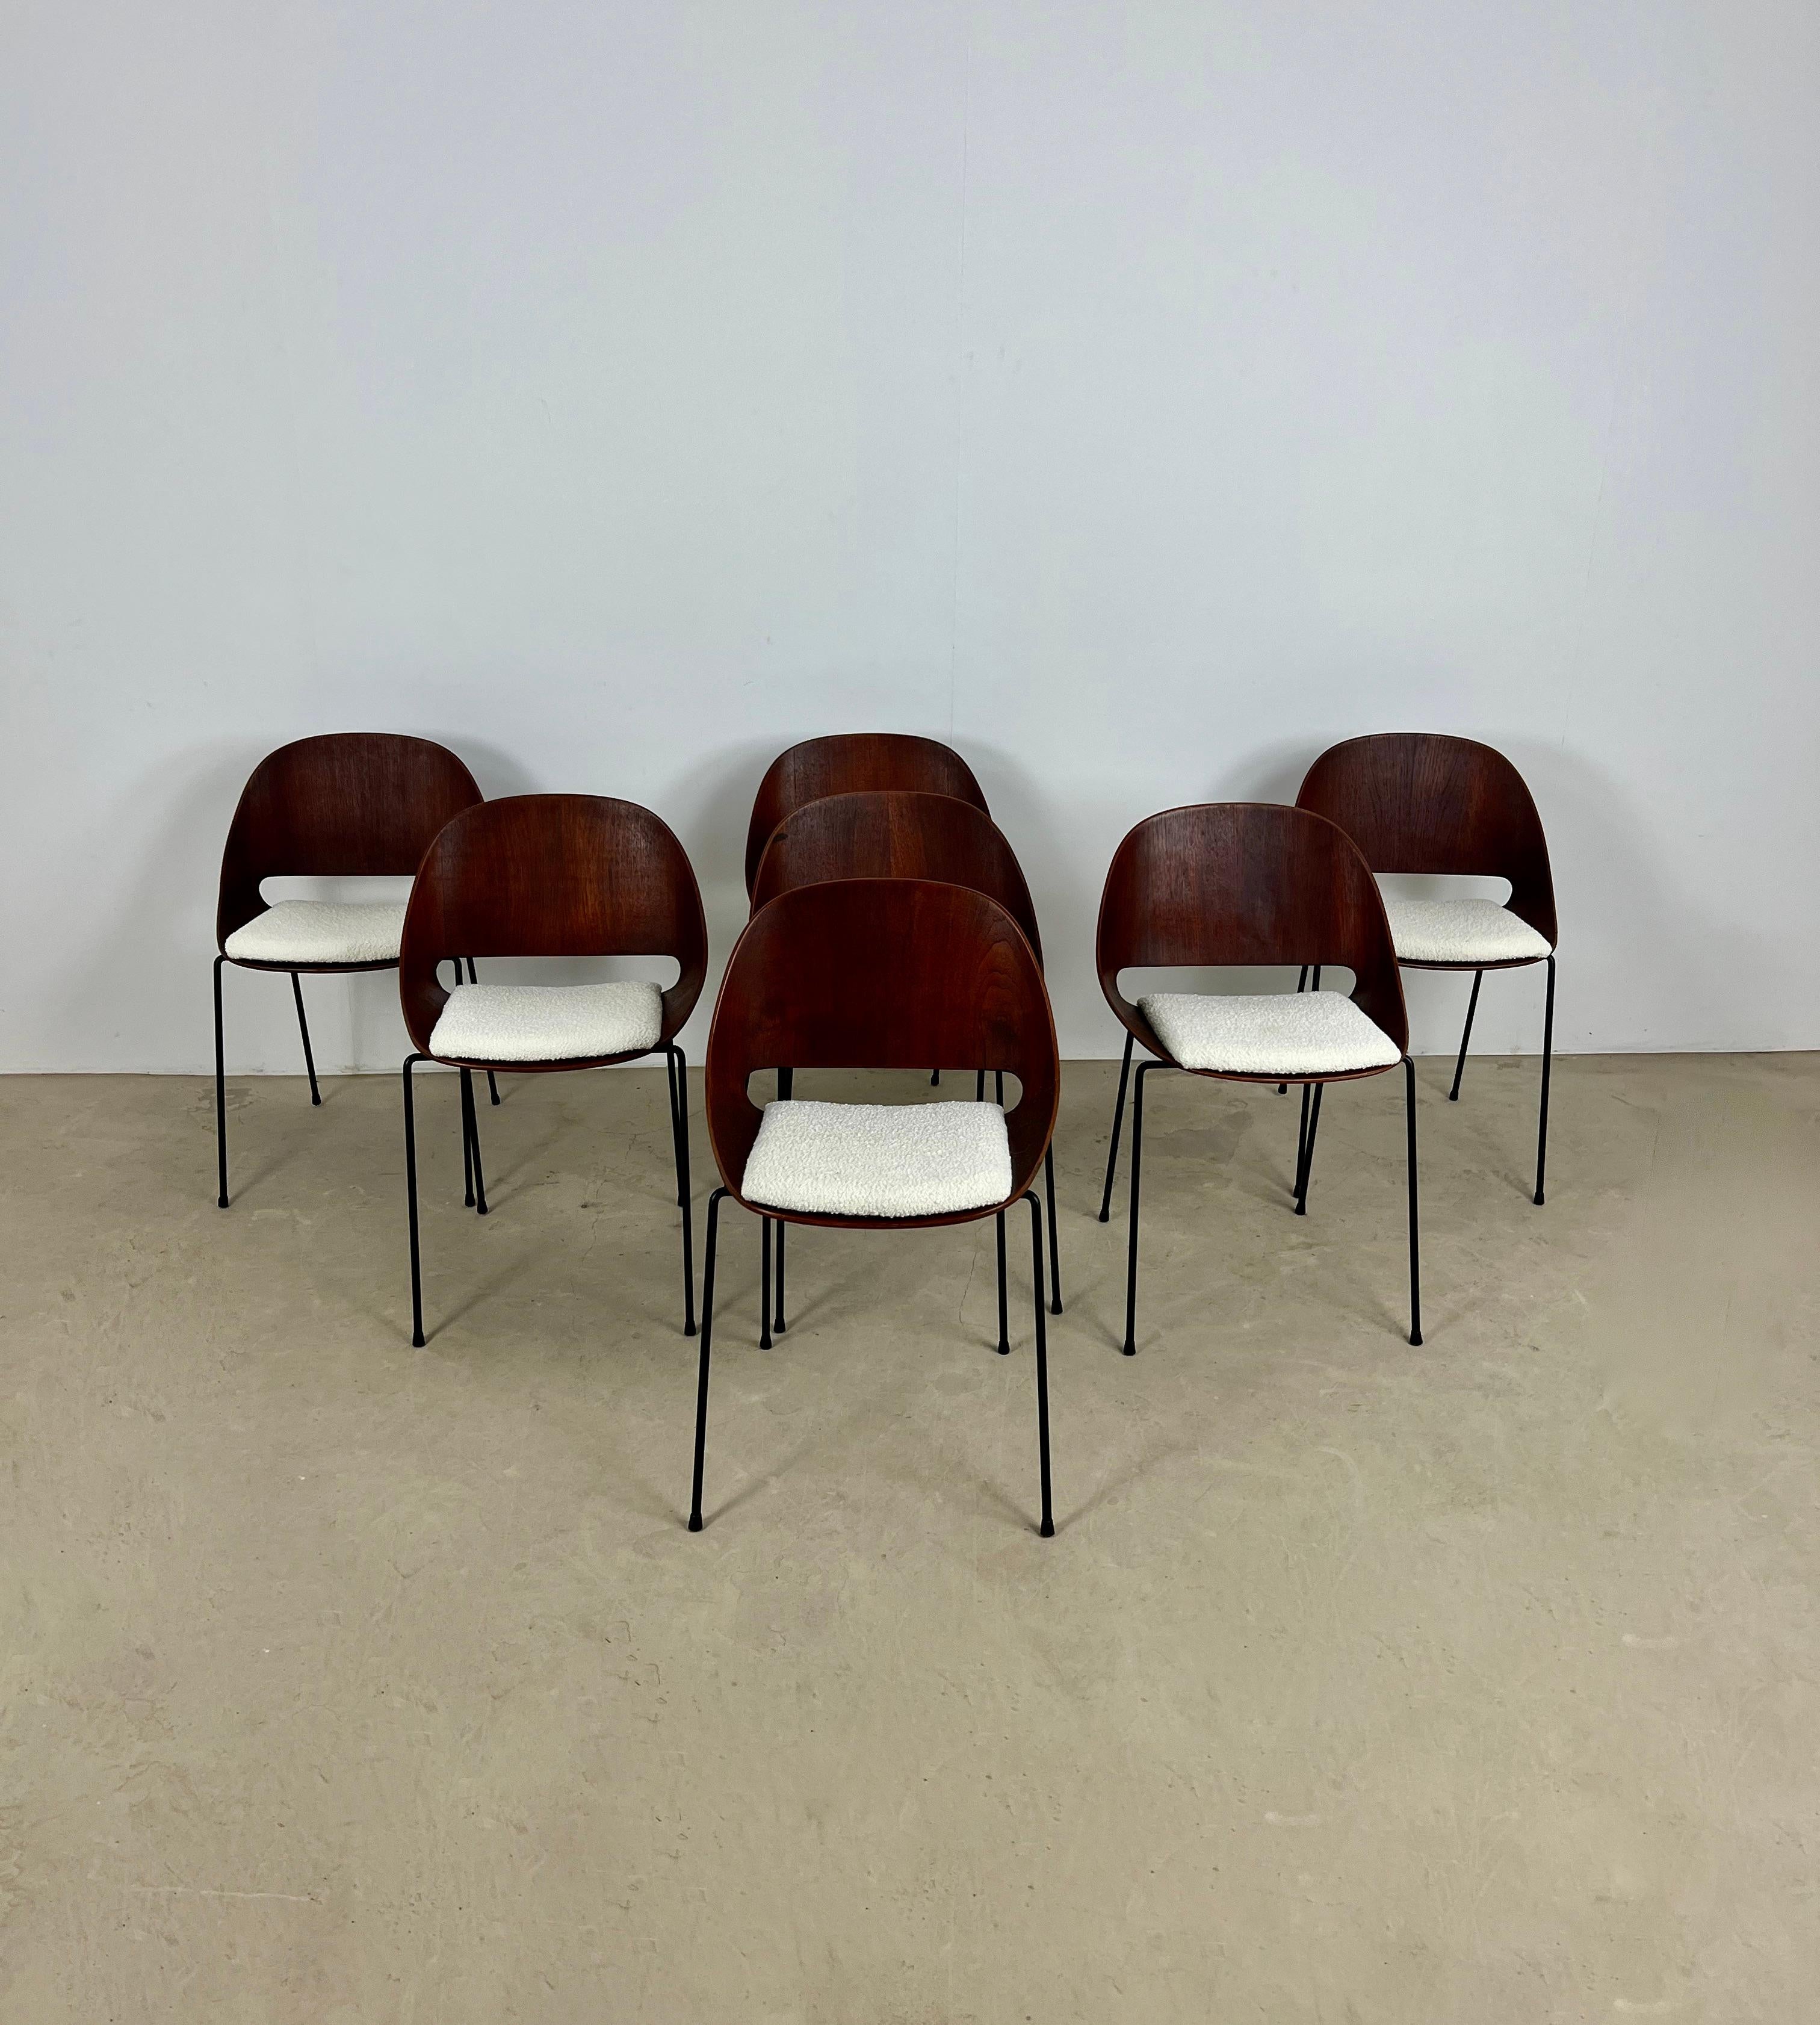 Series of 7 chairs in wood, metal and fabric in white color. Stamped under the seat. Seat height: 50cm. Wear due to time and age of chairs (see photo).